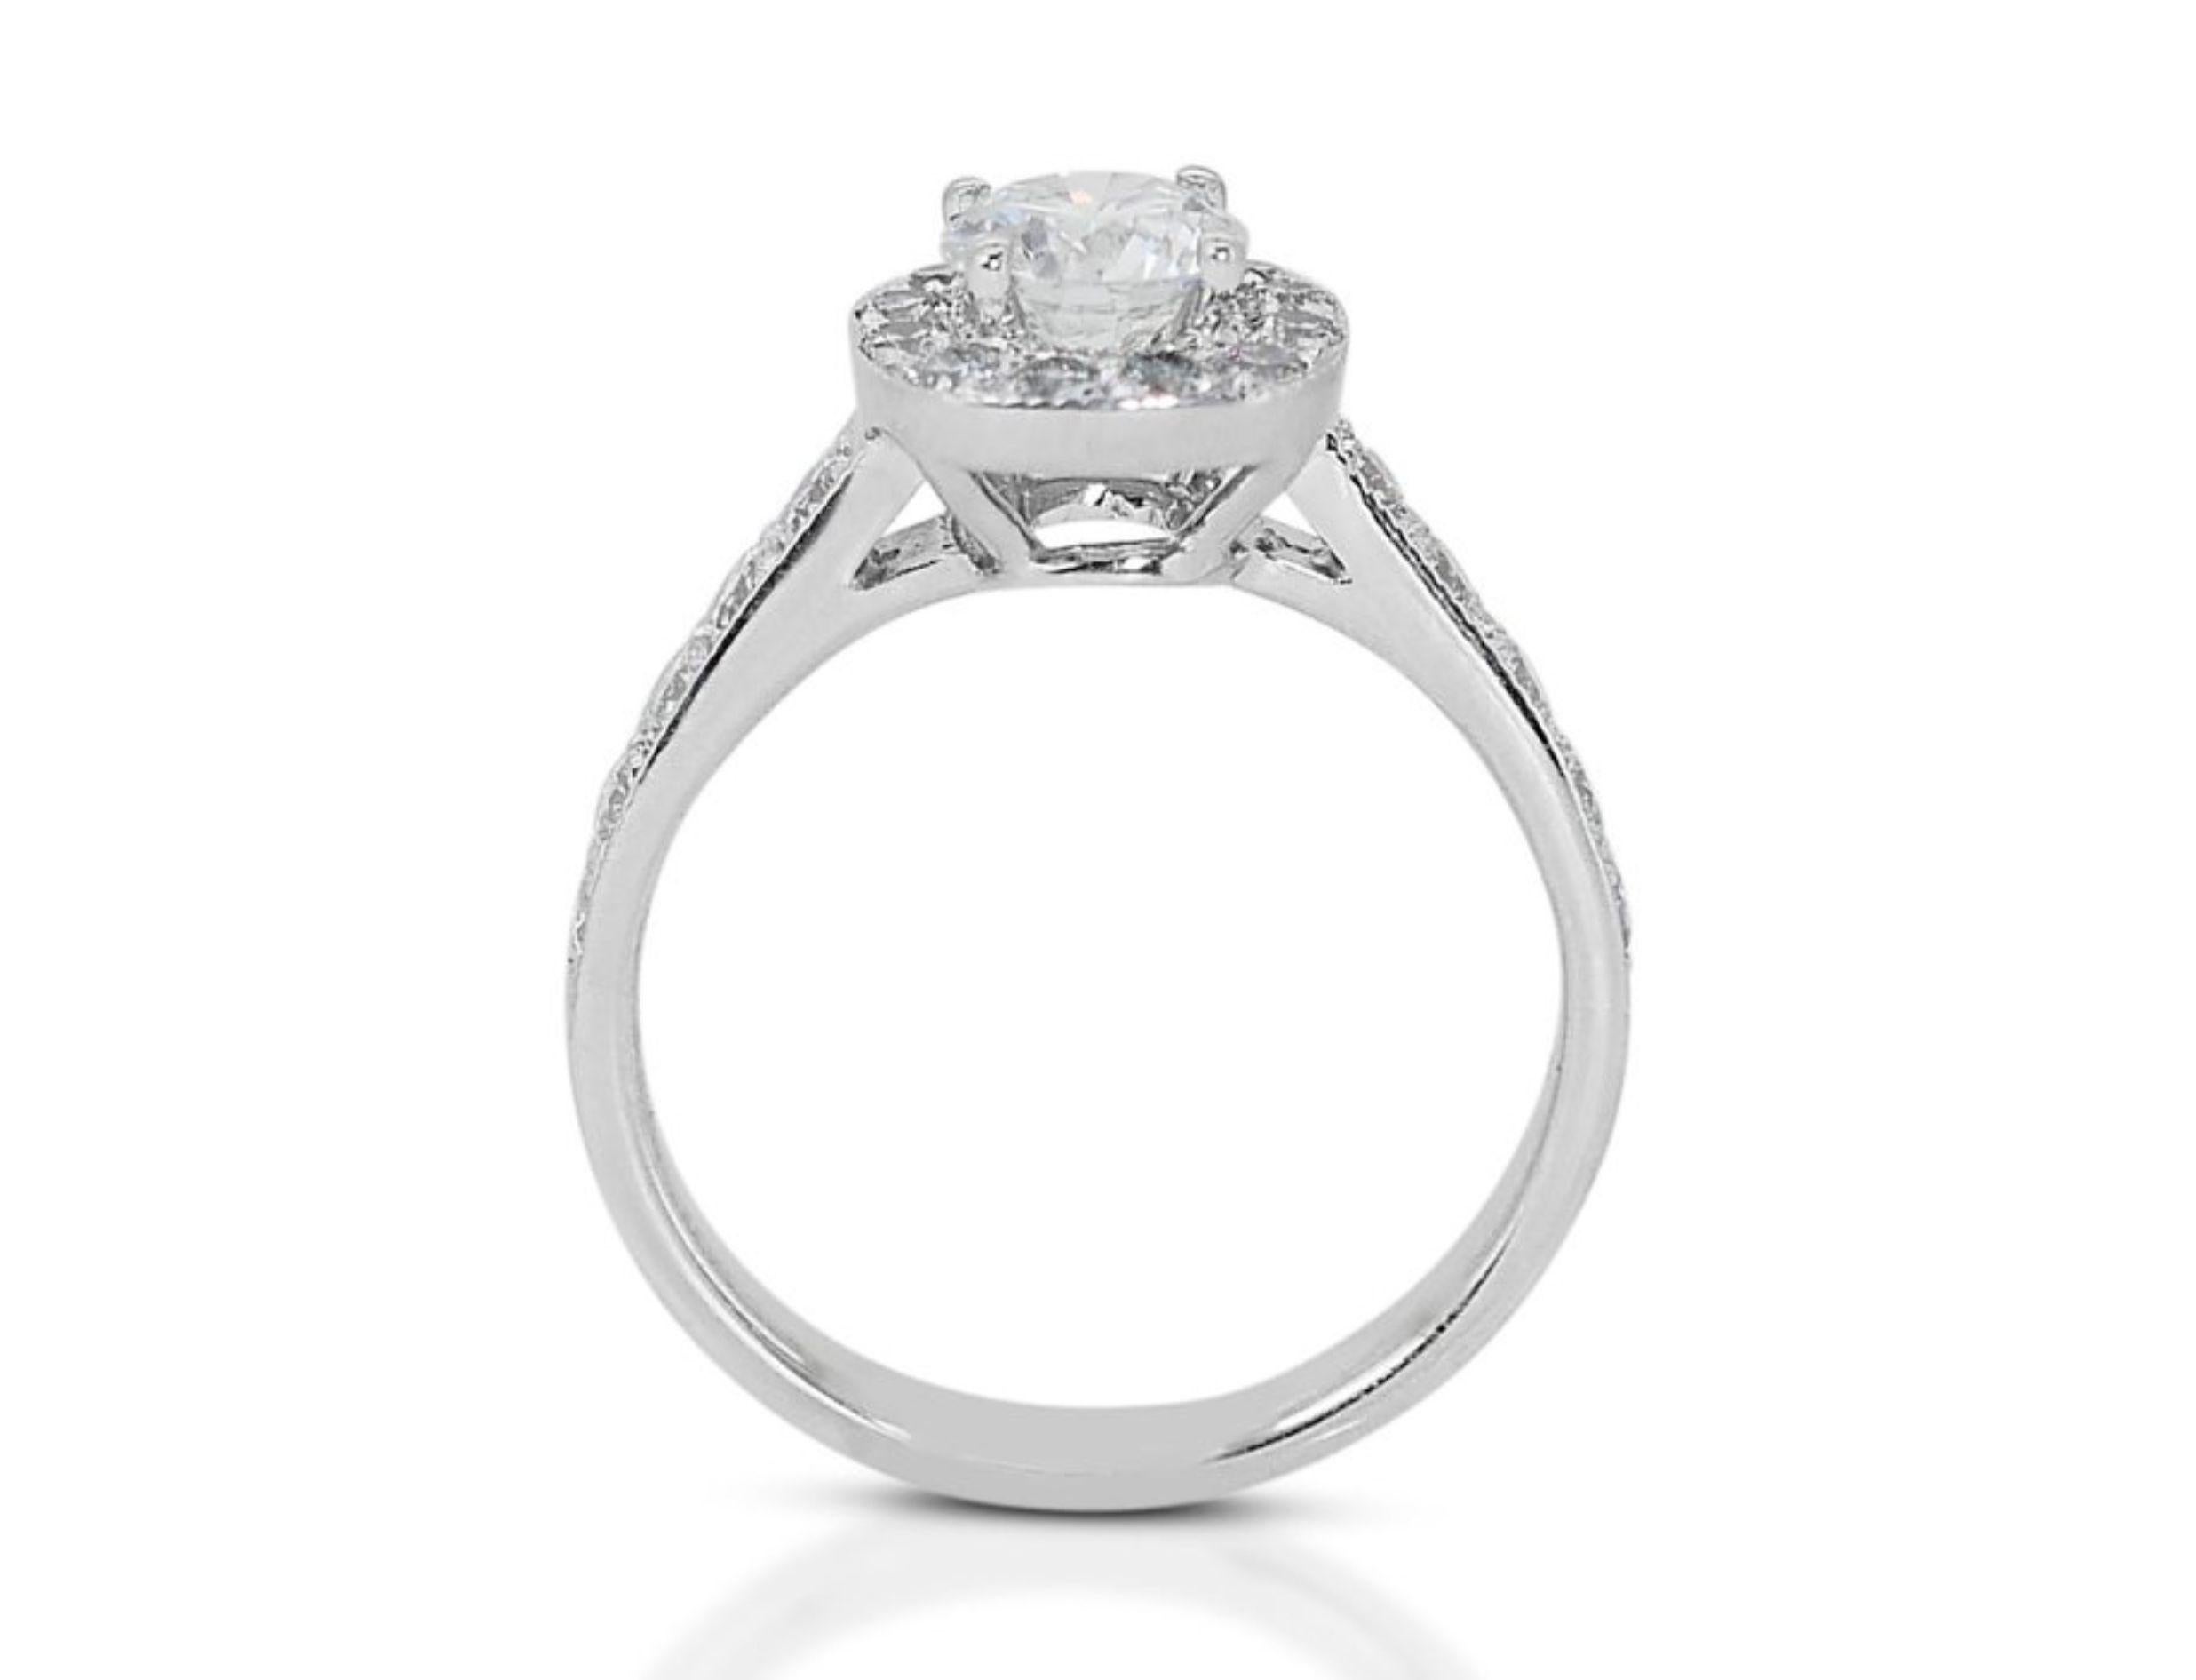 Captivating 0.52ct Pave Diamond Ring set in 18K White Gold For Sale 2